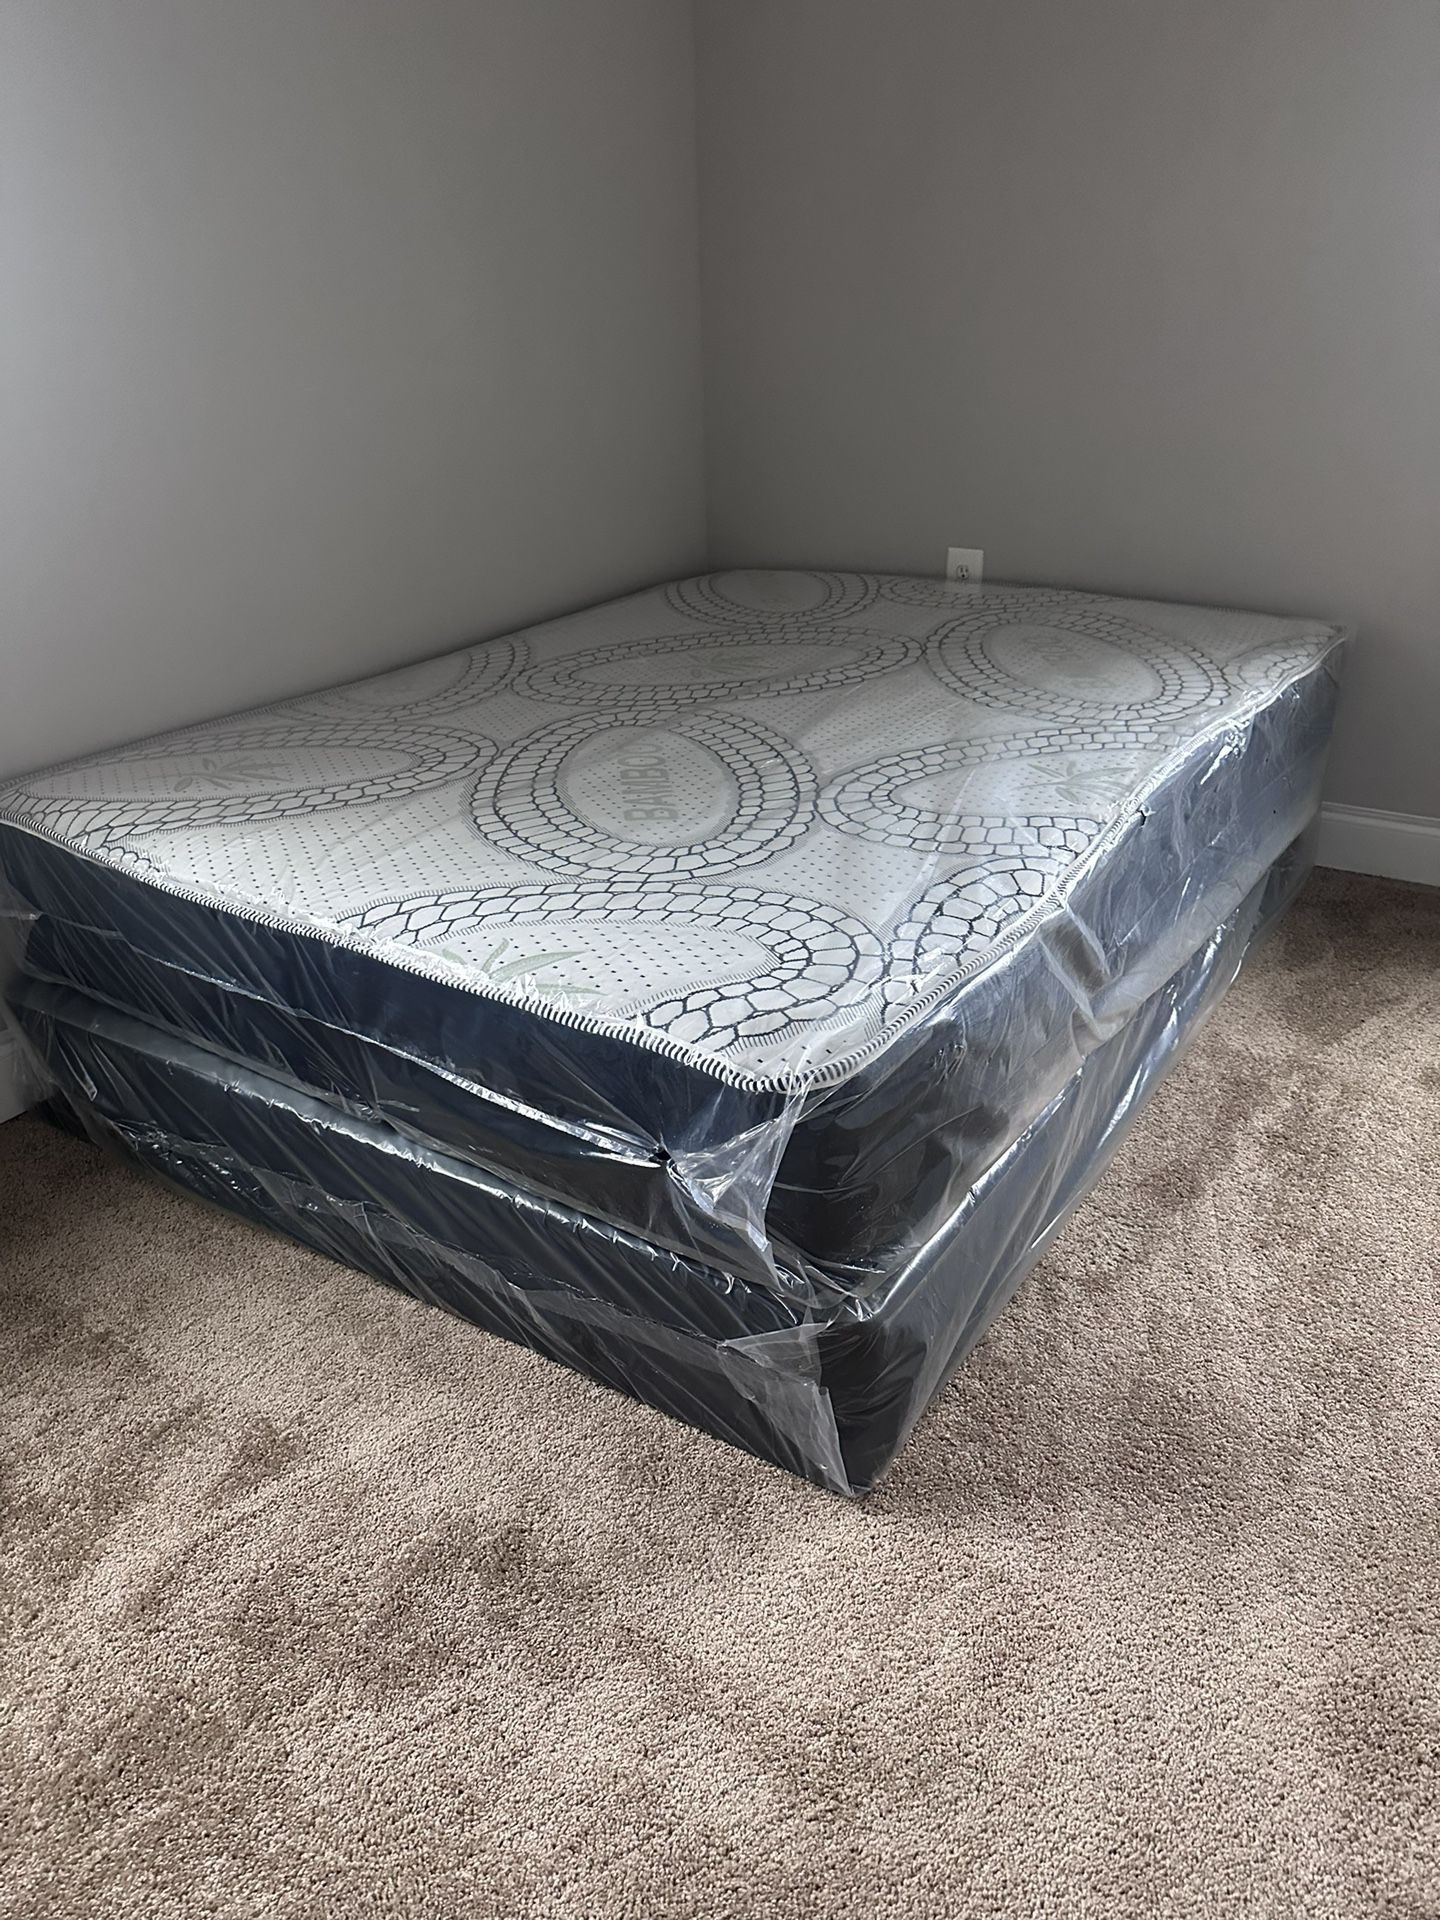 Queen Mattress Come With Free Box Spring - Same Day Delivery 